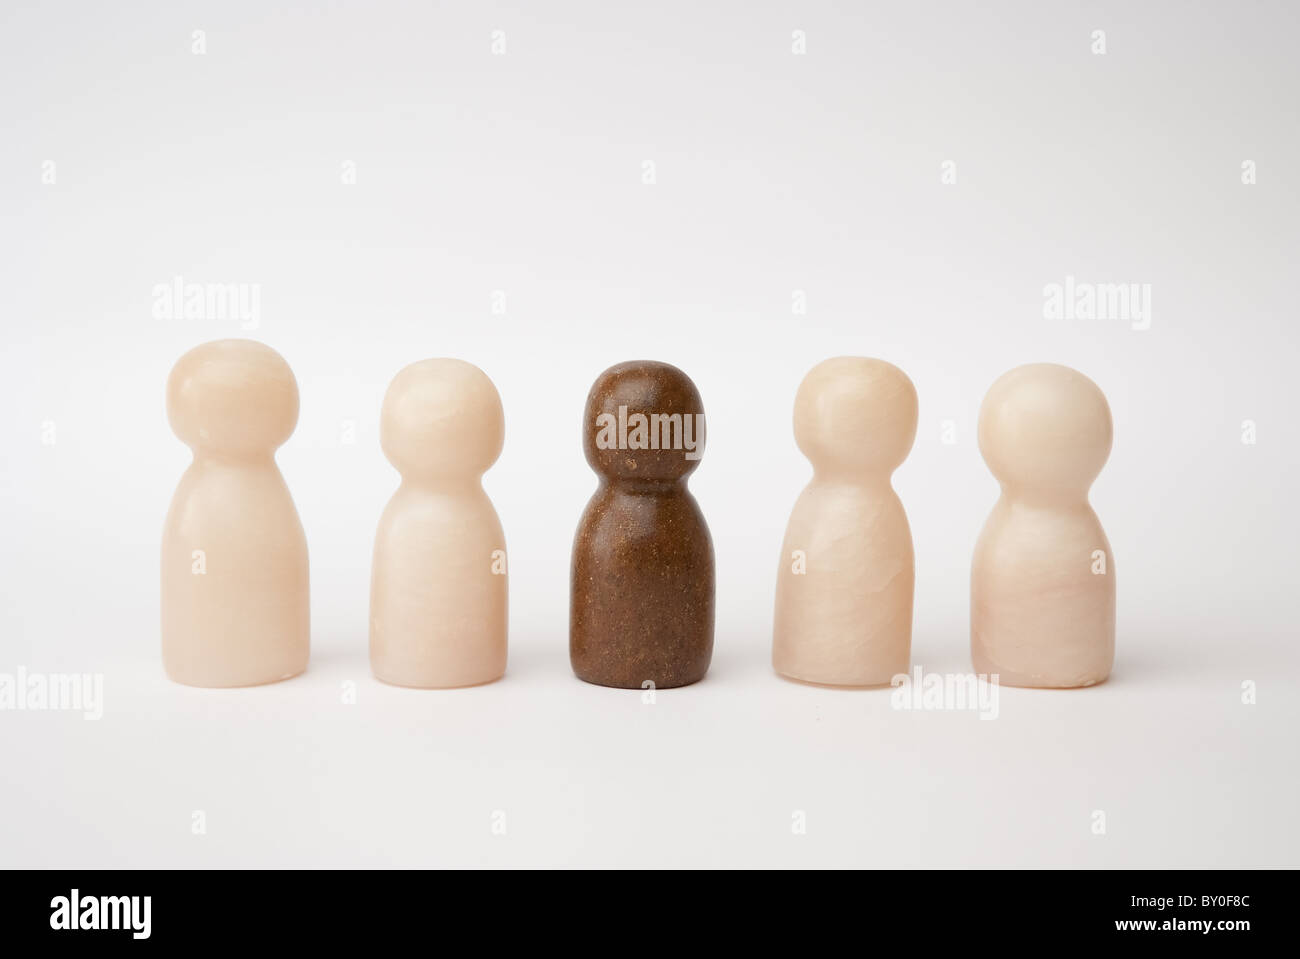 A brown figure integrated in a group of 4 white figures Stock Photo